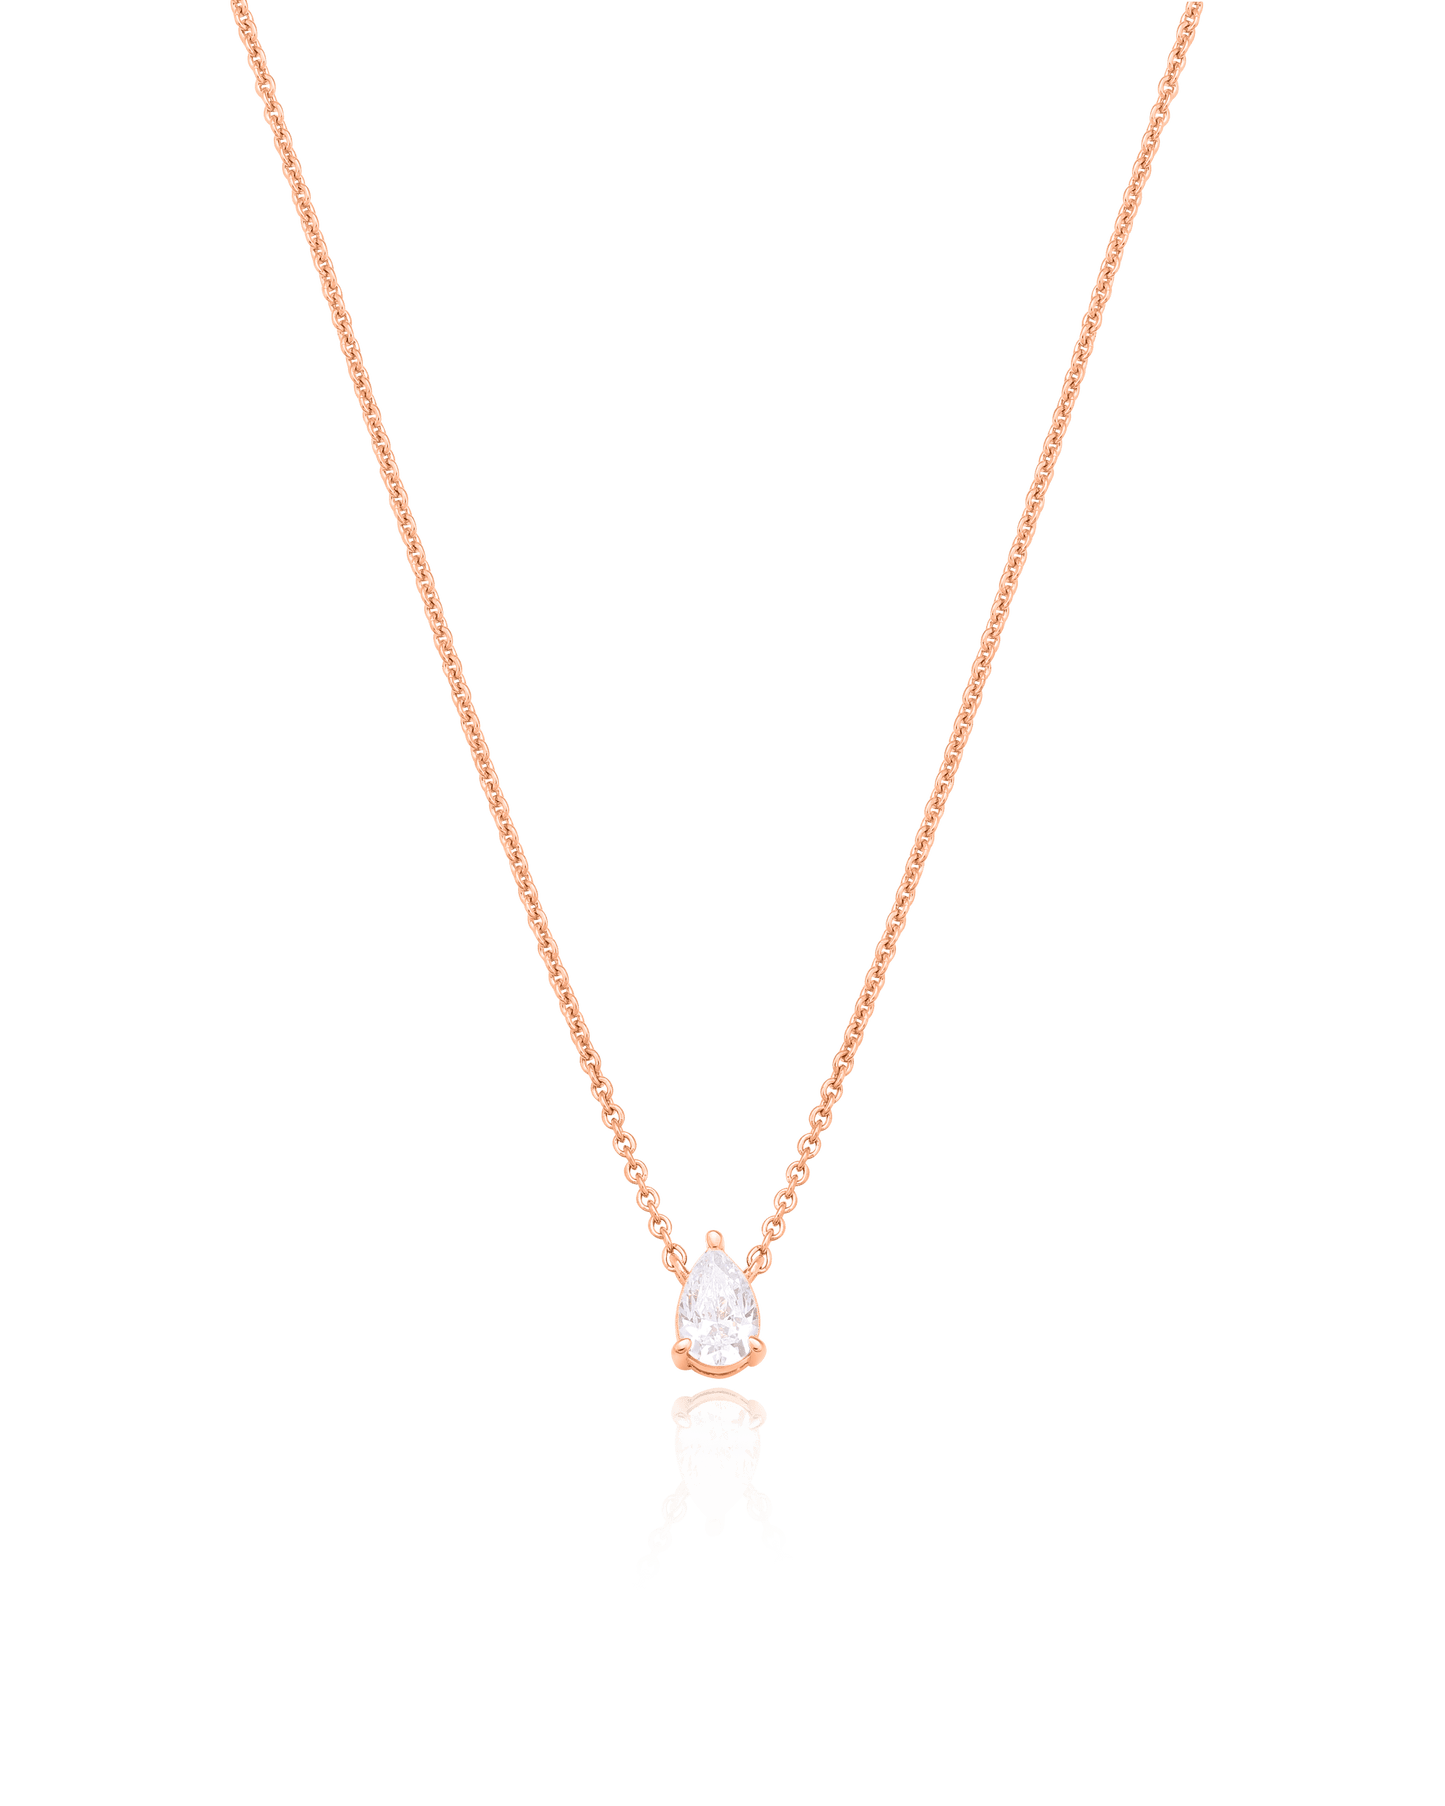 Pear Solitaire Diamond Necklace - 925 Sterling Silver Necklaces magal-dev 